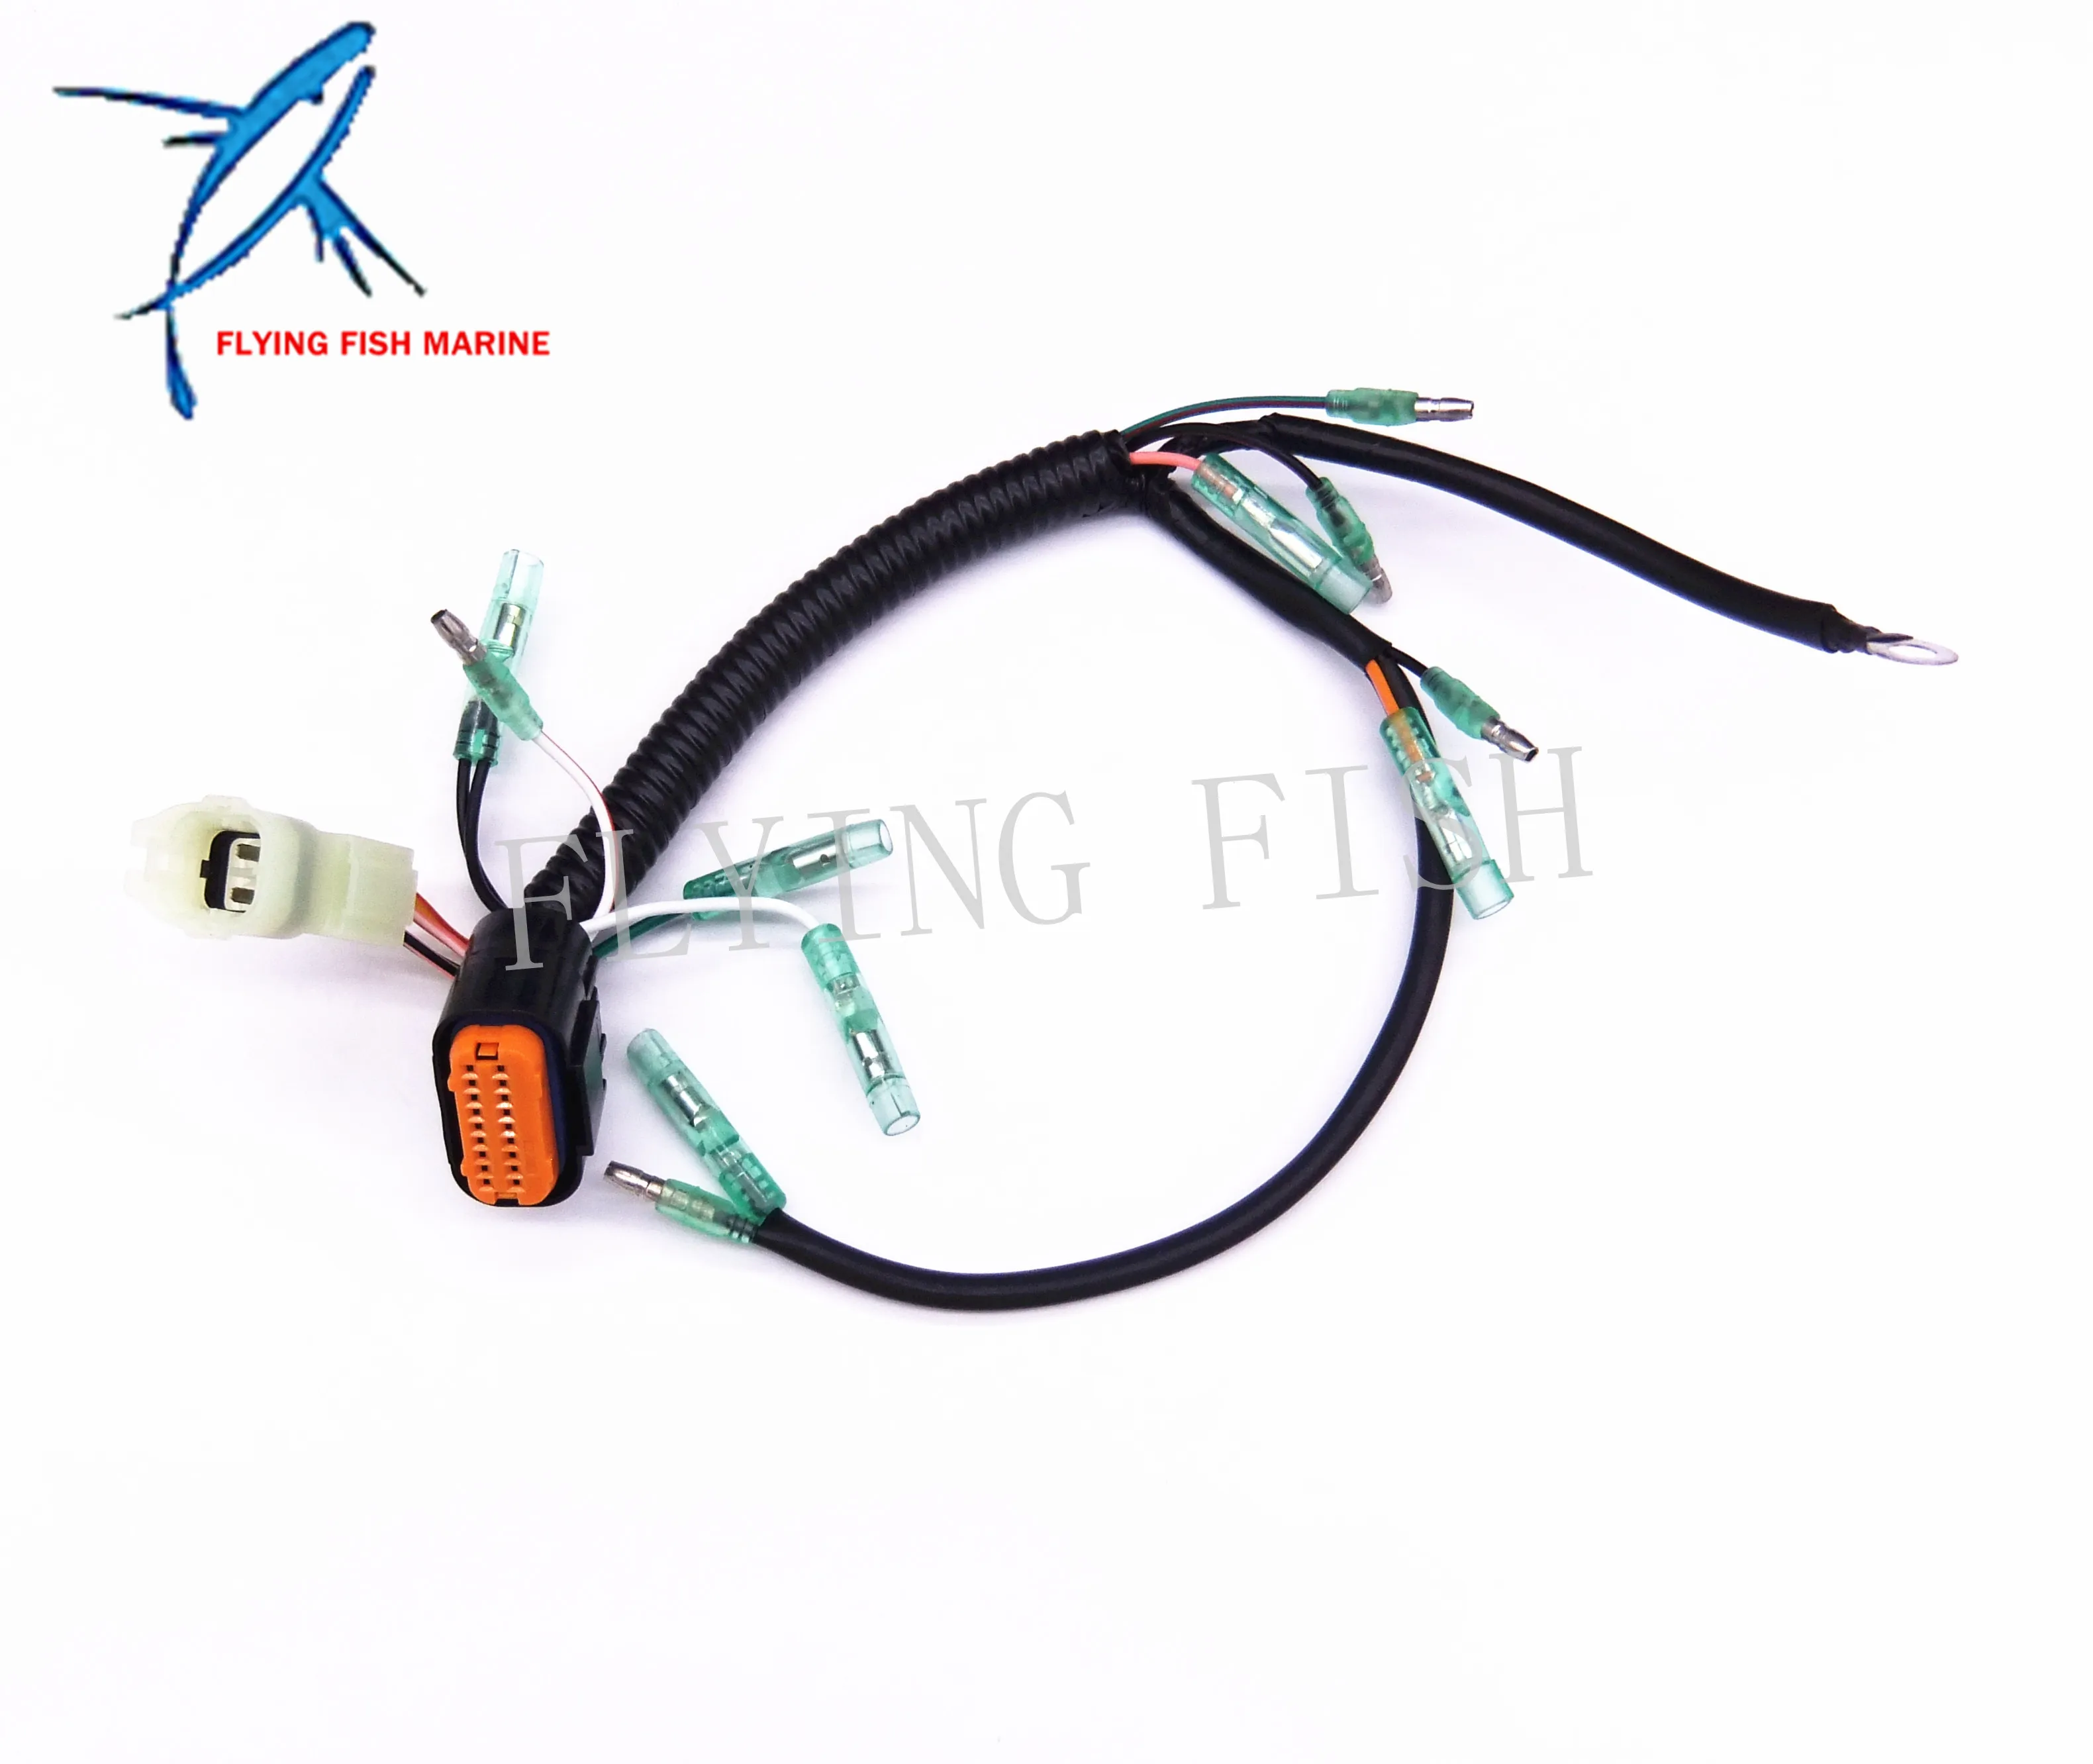 Outboard Engine 6AH-8259M-00 99999-04180-00 Wire Harness Assy for Yamaha Boat Motor F15 F20 4-Stroke